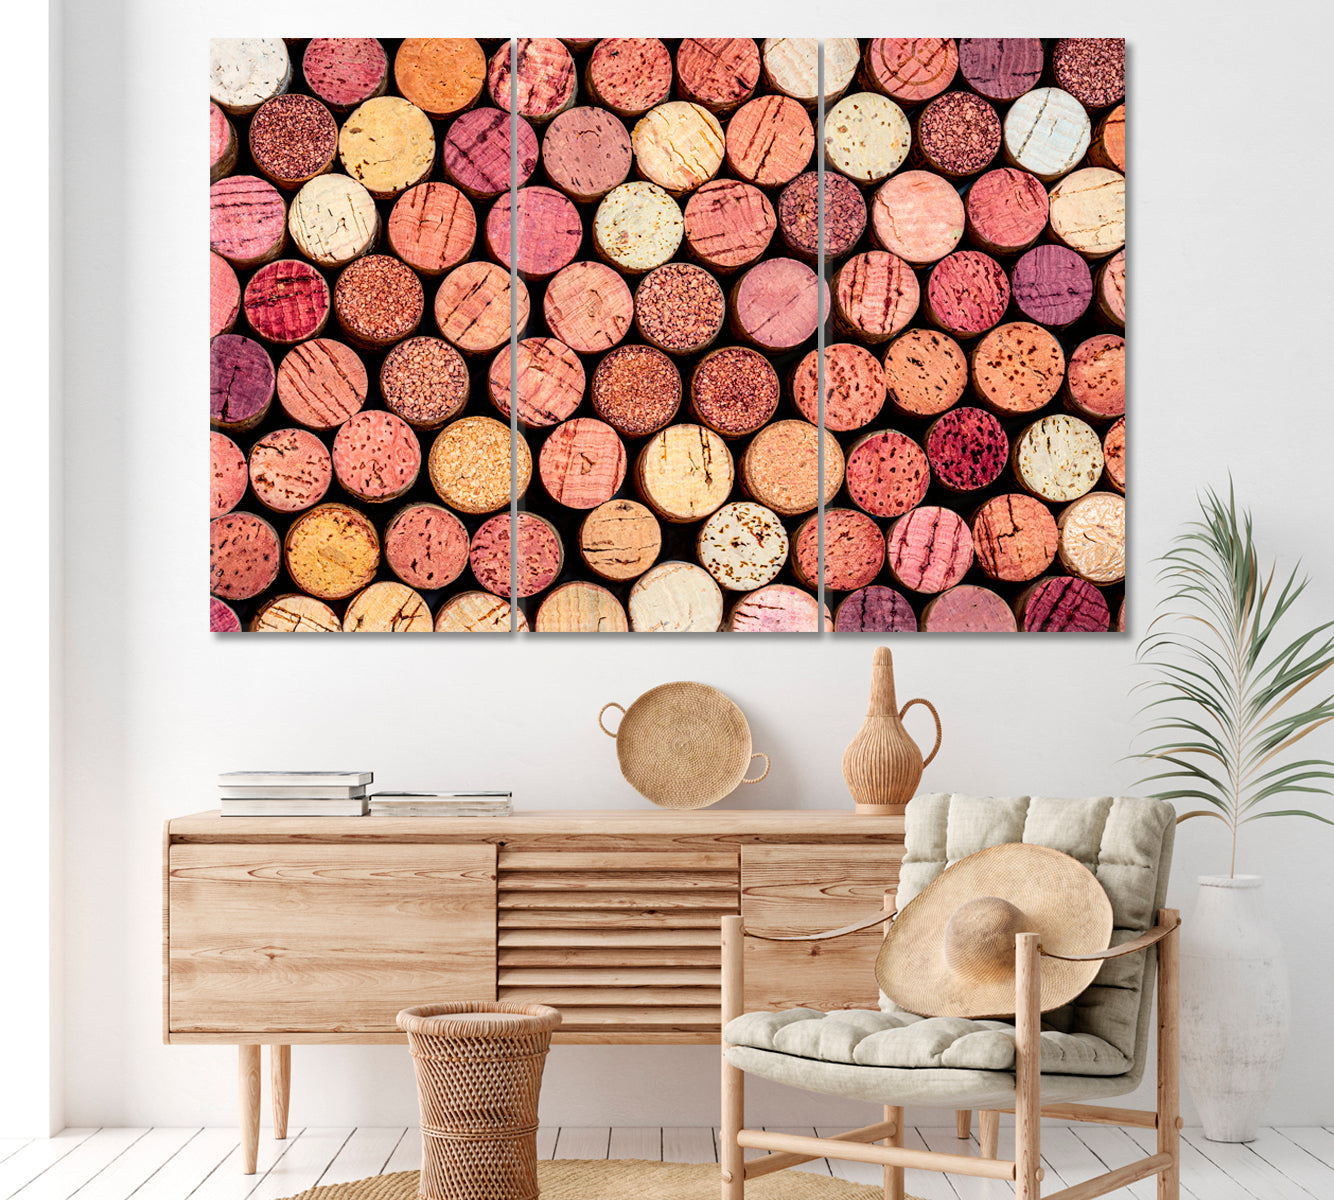 Wine Corks Canvas Print ArtLexy 3 Panels 36"x24" inches 